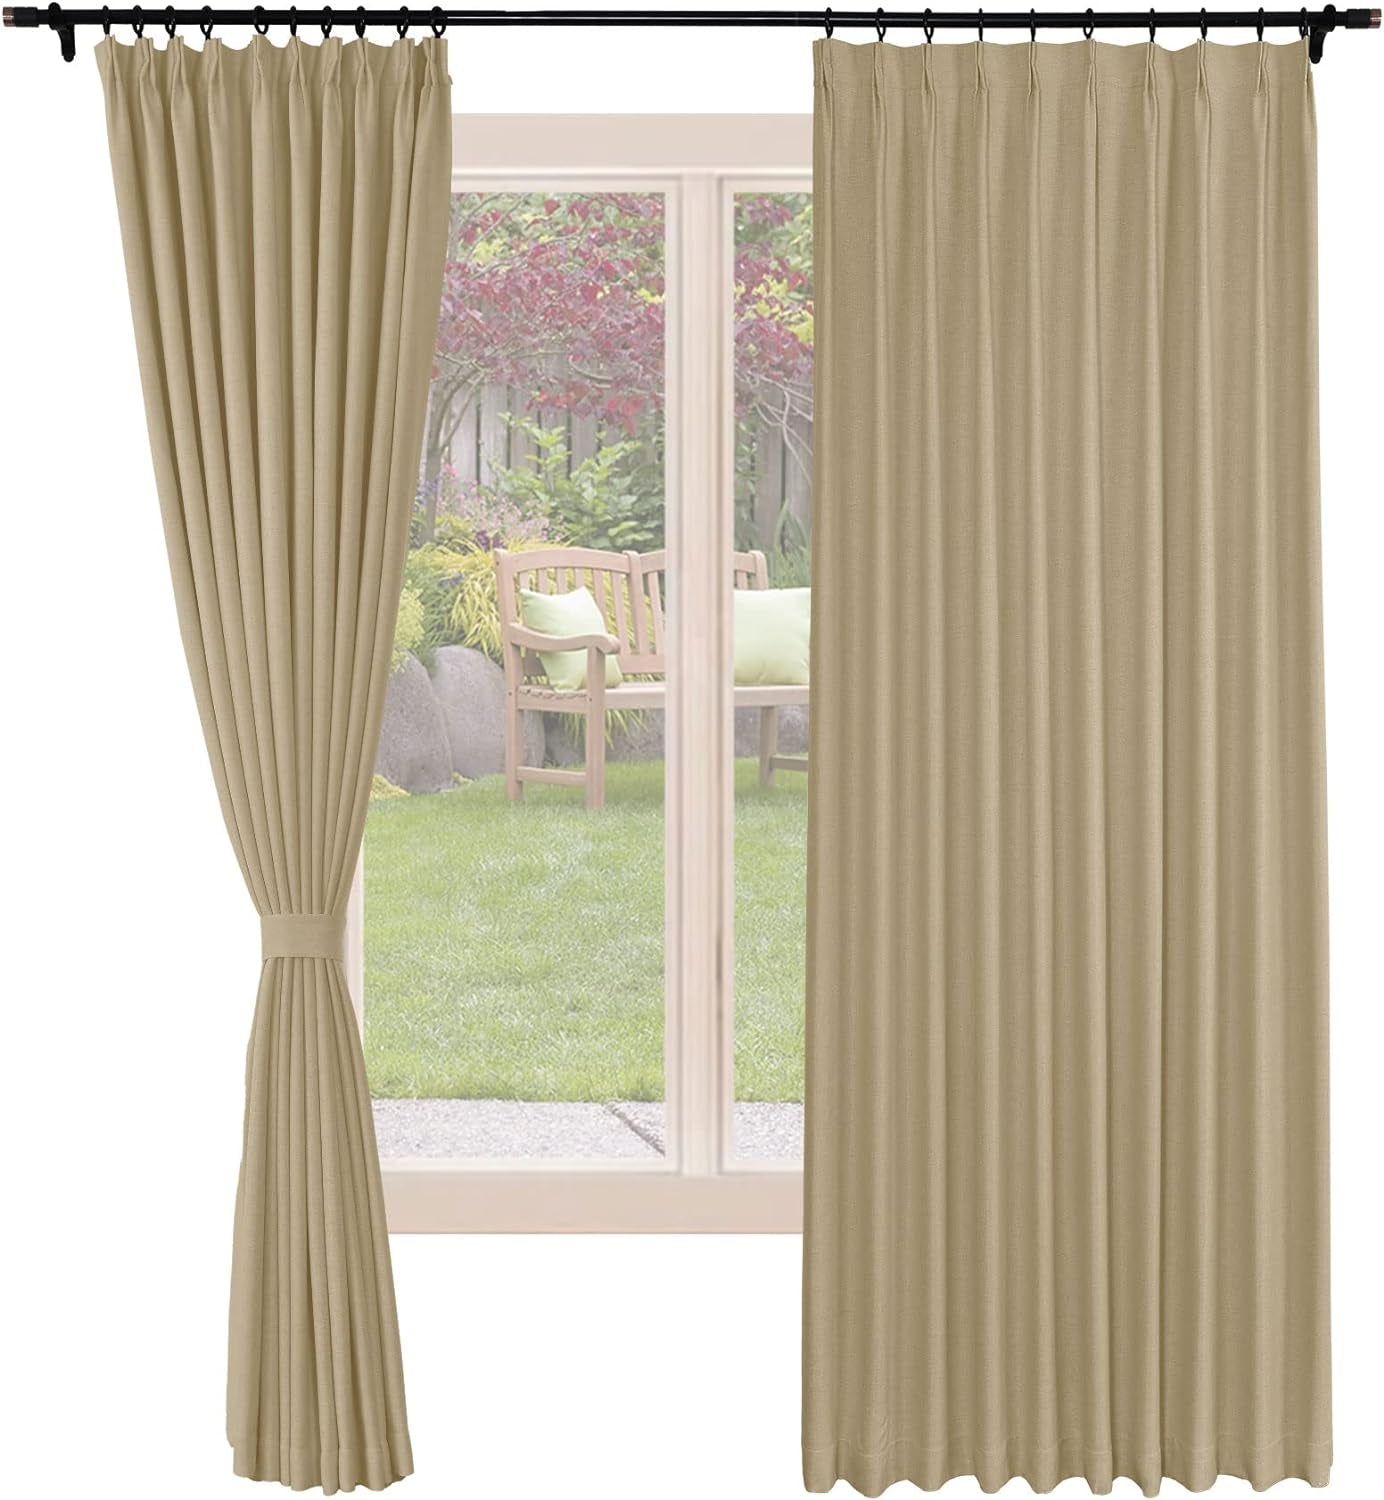 Frelement Blackout Curtains Natural Linen Curtains Pinch Pleat Drapery Panels for Living Room Thermal Insulated Curtains, 52" W X 63" L, 2 Panels, Oasis  Frelement 08 Khaki (100Wx84L Inch)*2 